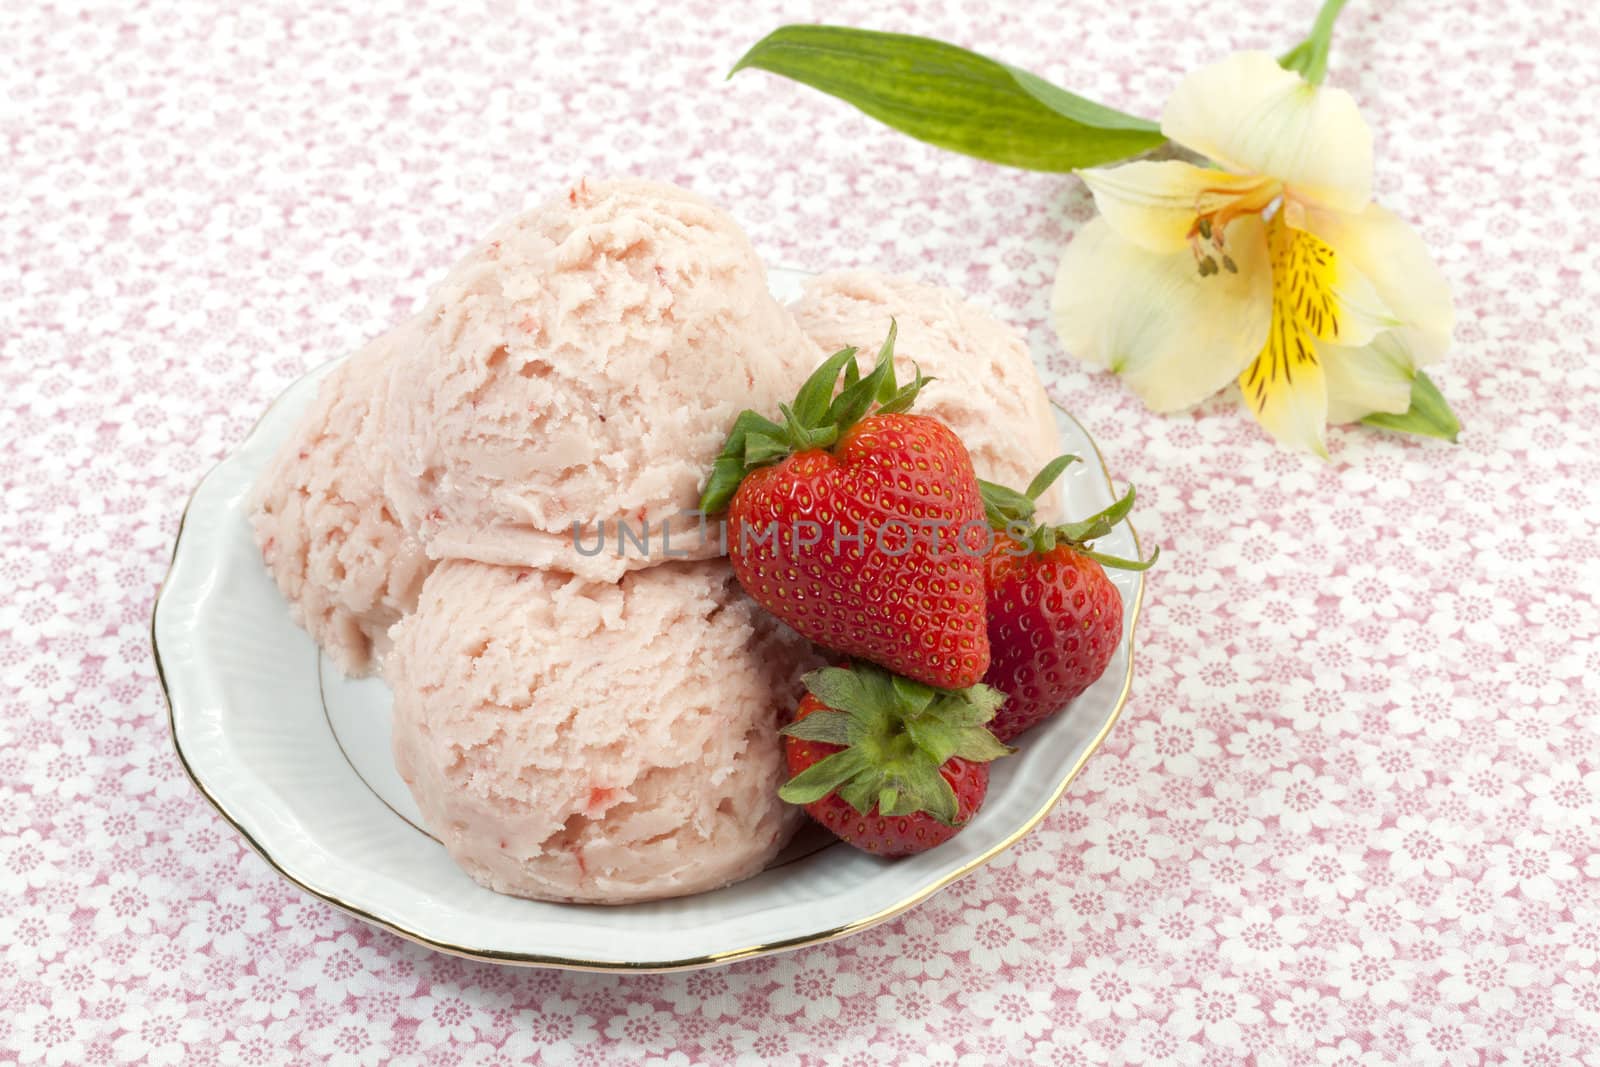 strawberry ice cream with flowers at the side on a floral background